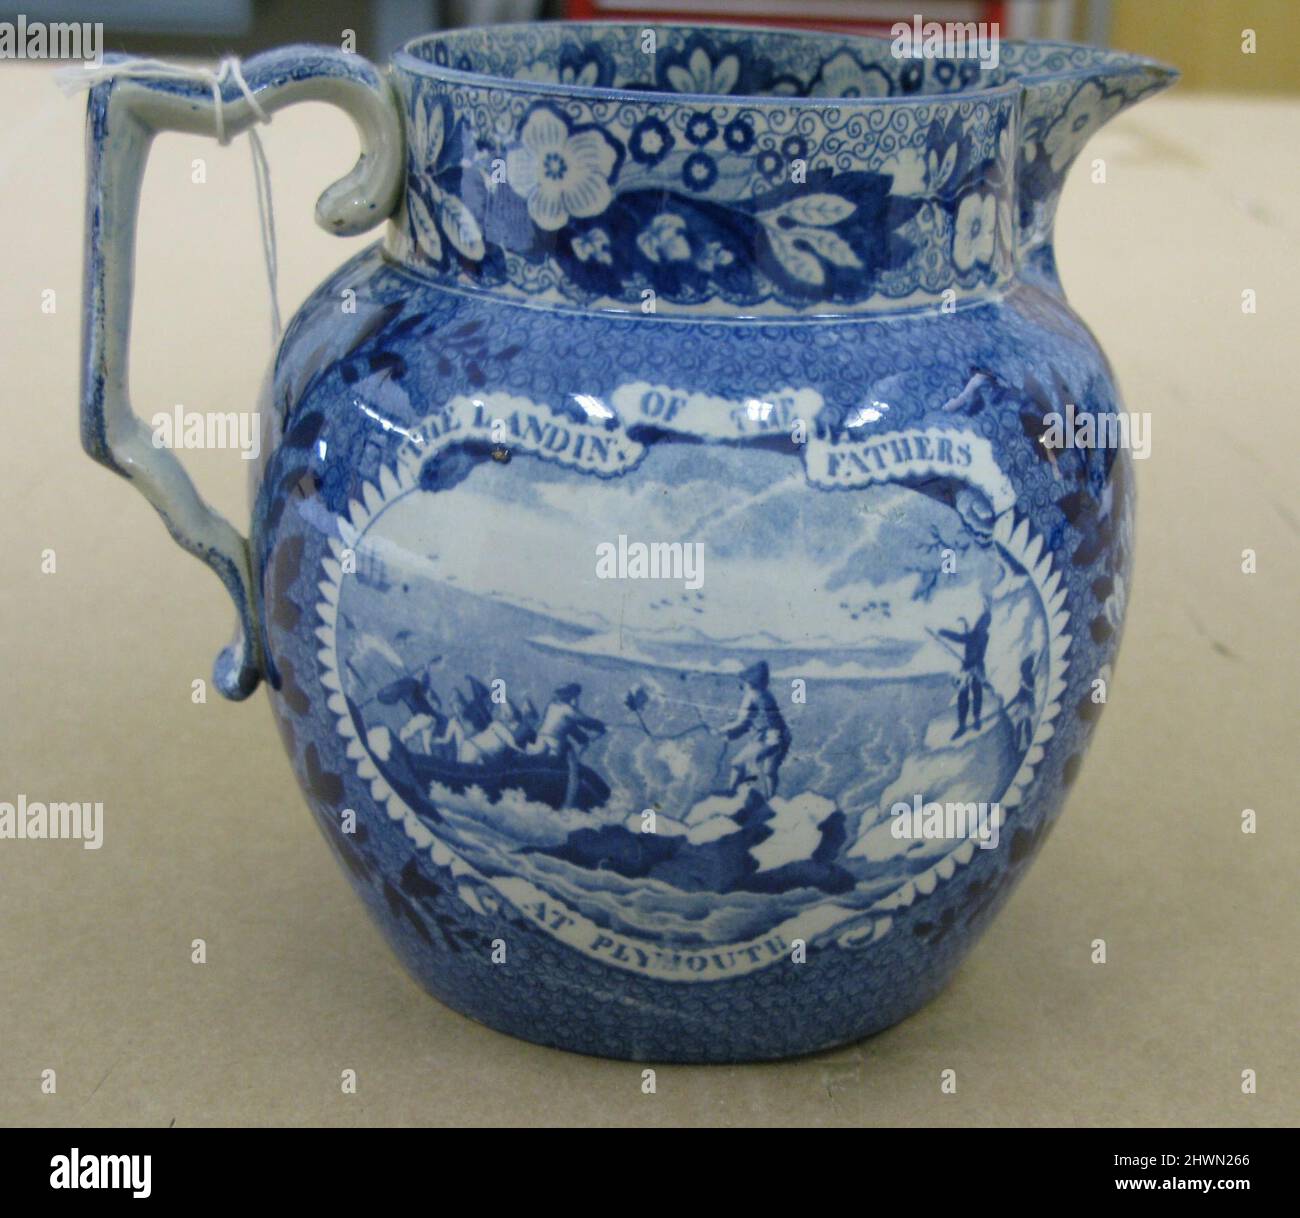 Pitcher with a view of “The Landing of the Fathers at Plymouth”. Manufacturer: Enoch Wood and Sons, British, 1820–1846After Probable source material a) painting by: Michele Felice Cornè, American, born Italy, 1752–1845After Probable source material b) engraved after: John Warner Barber, American, 1798–1885Engraver Probable source material c) engraved by: Samuel Hill, American, active 1789–1803Honorand: John Carver, American, ca. 1576–1621Honorand: William Bradford, American, 1590–1657Honorand: Edward Winslow, American, 1595–1655Honorand: William Brewster, American, 1567–1644Honorand: Myles Sta Stock Photo